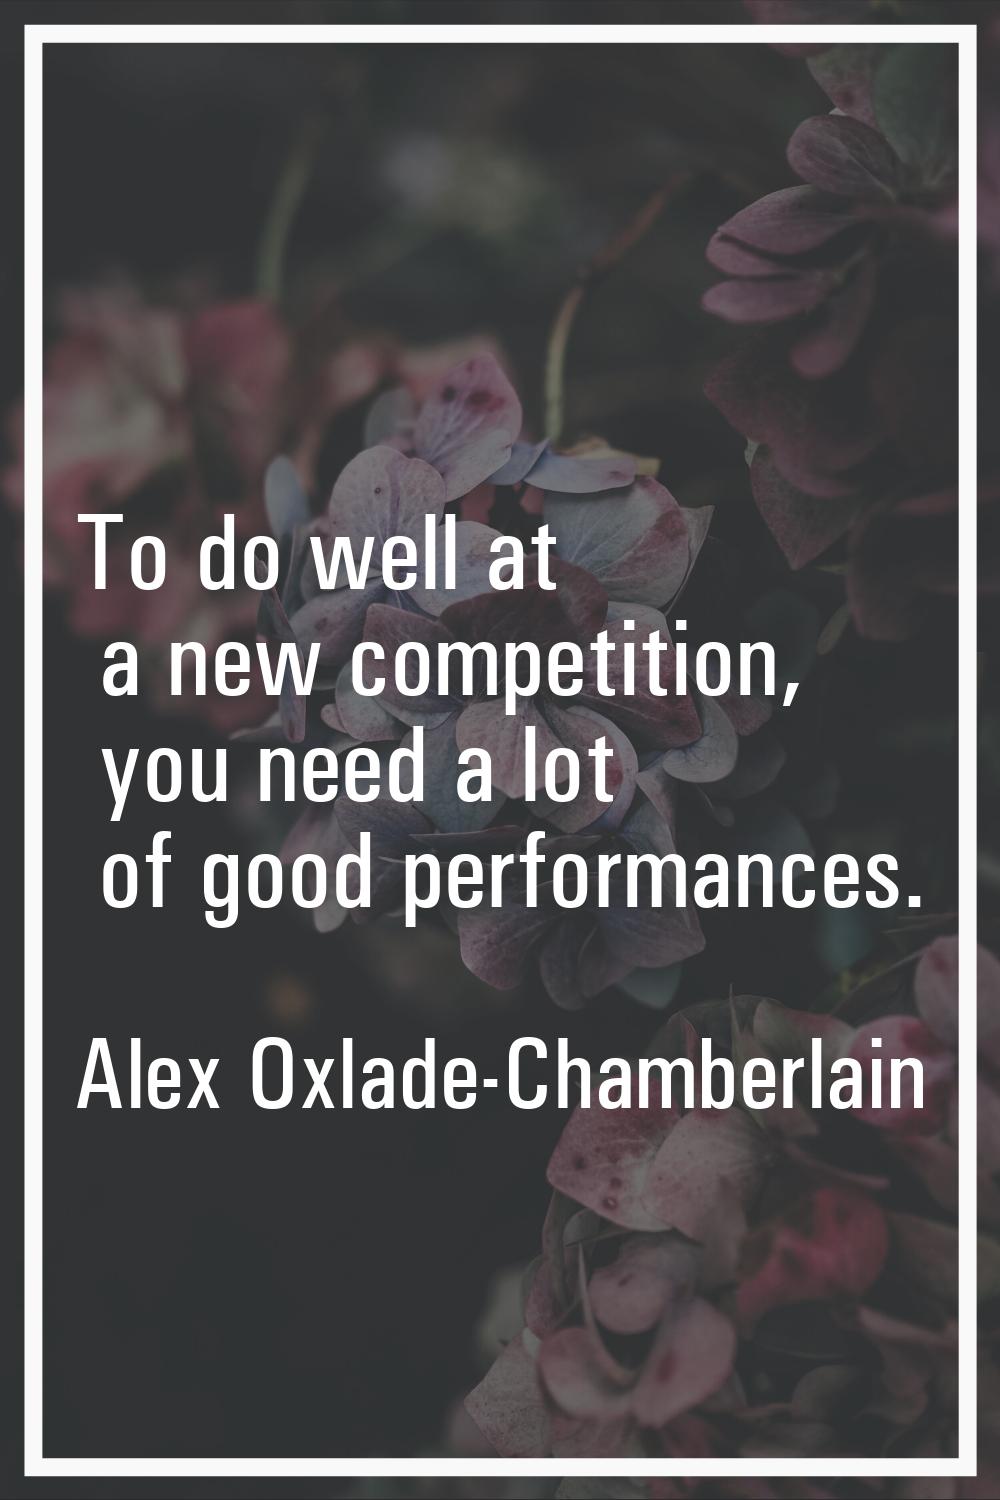 To do well at a new competition, you need a lot of good performances.